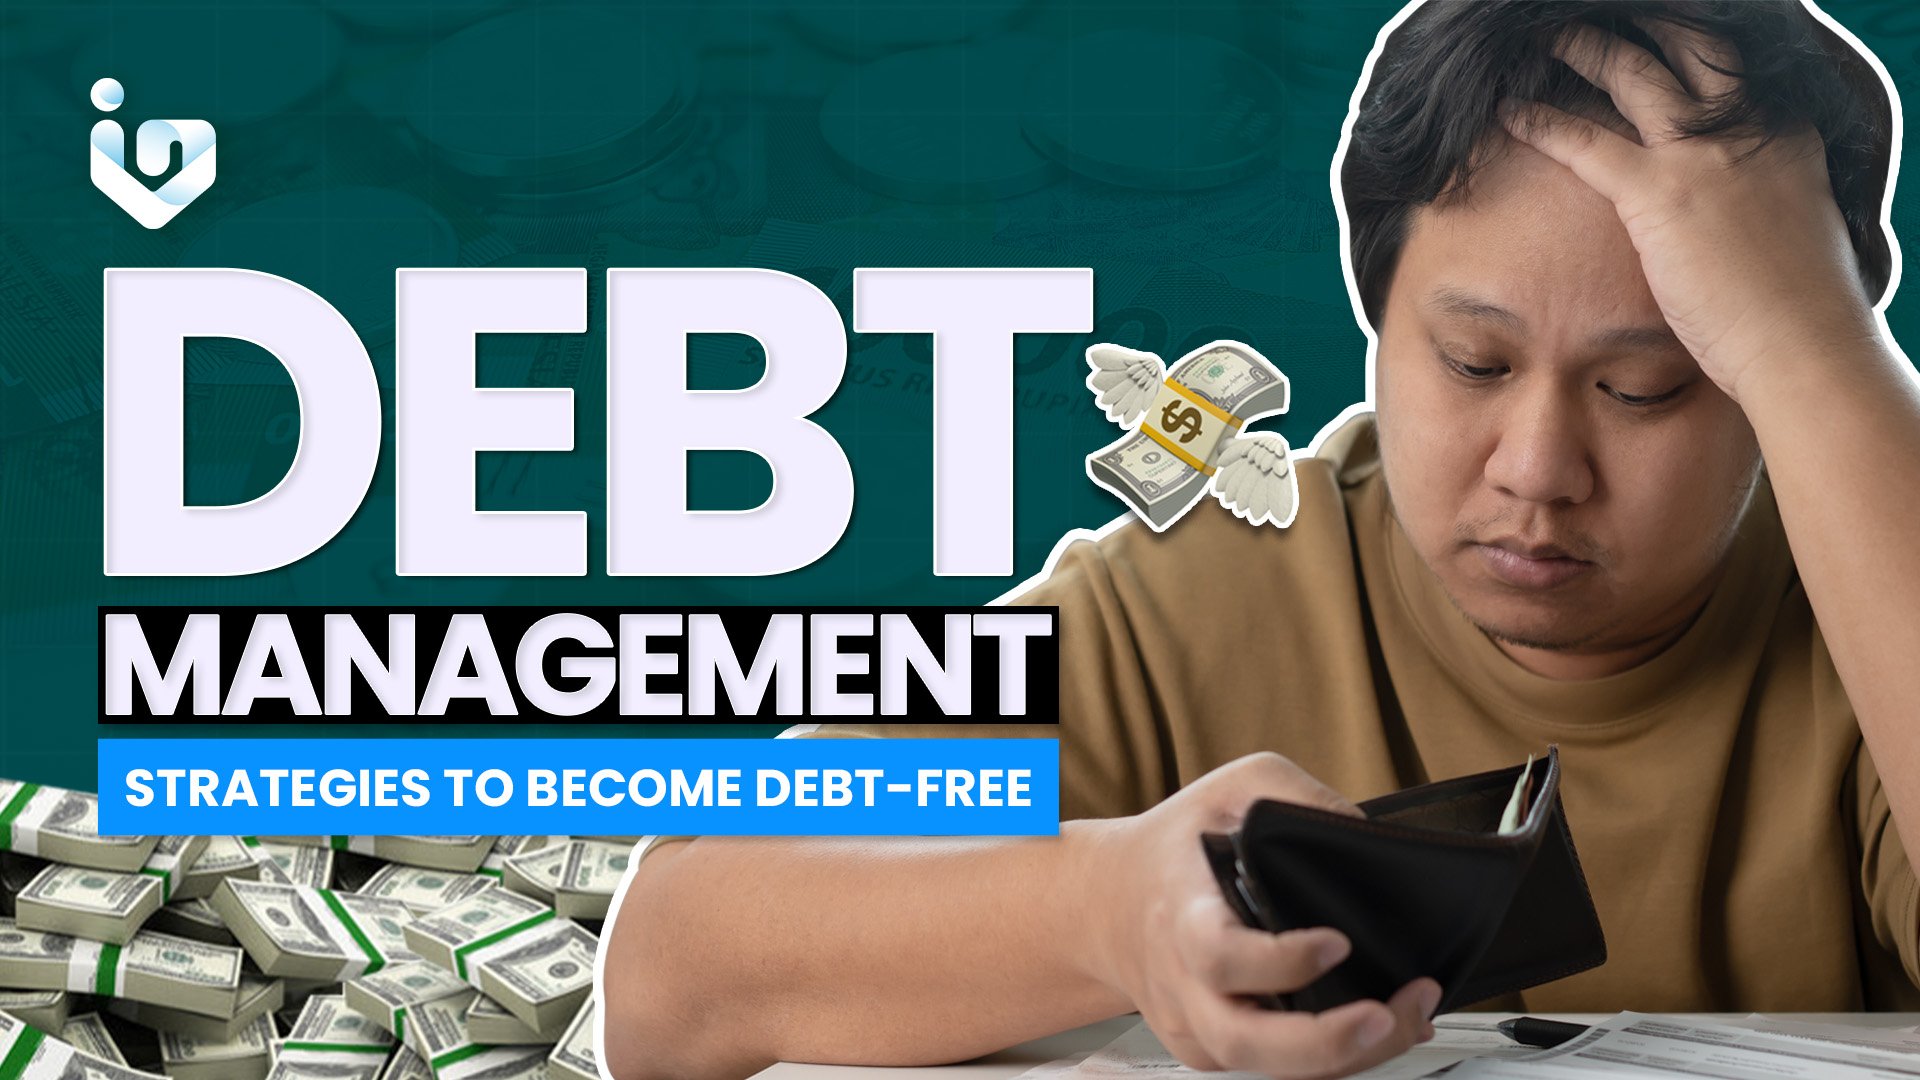 Debt Management: Strategies to Become Debt-Free